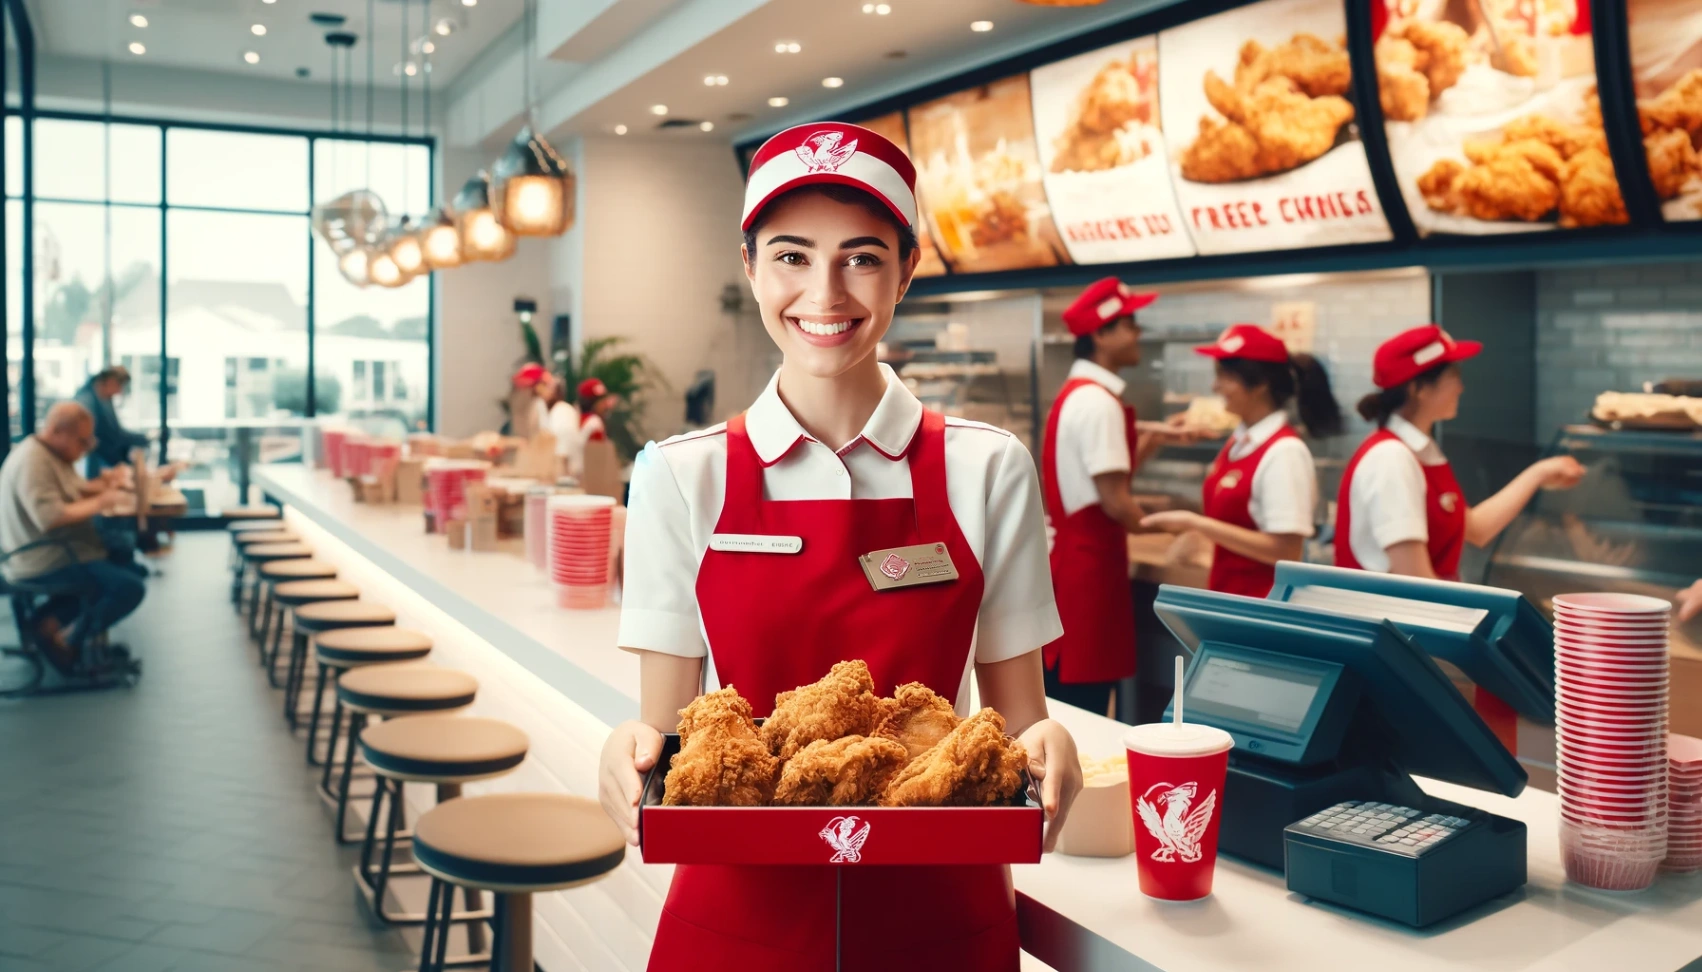 KFC - Learn How to Apply for Jobs Today